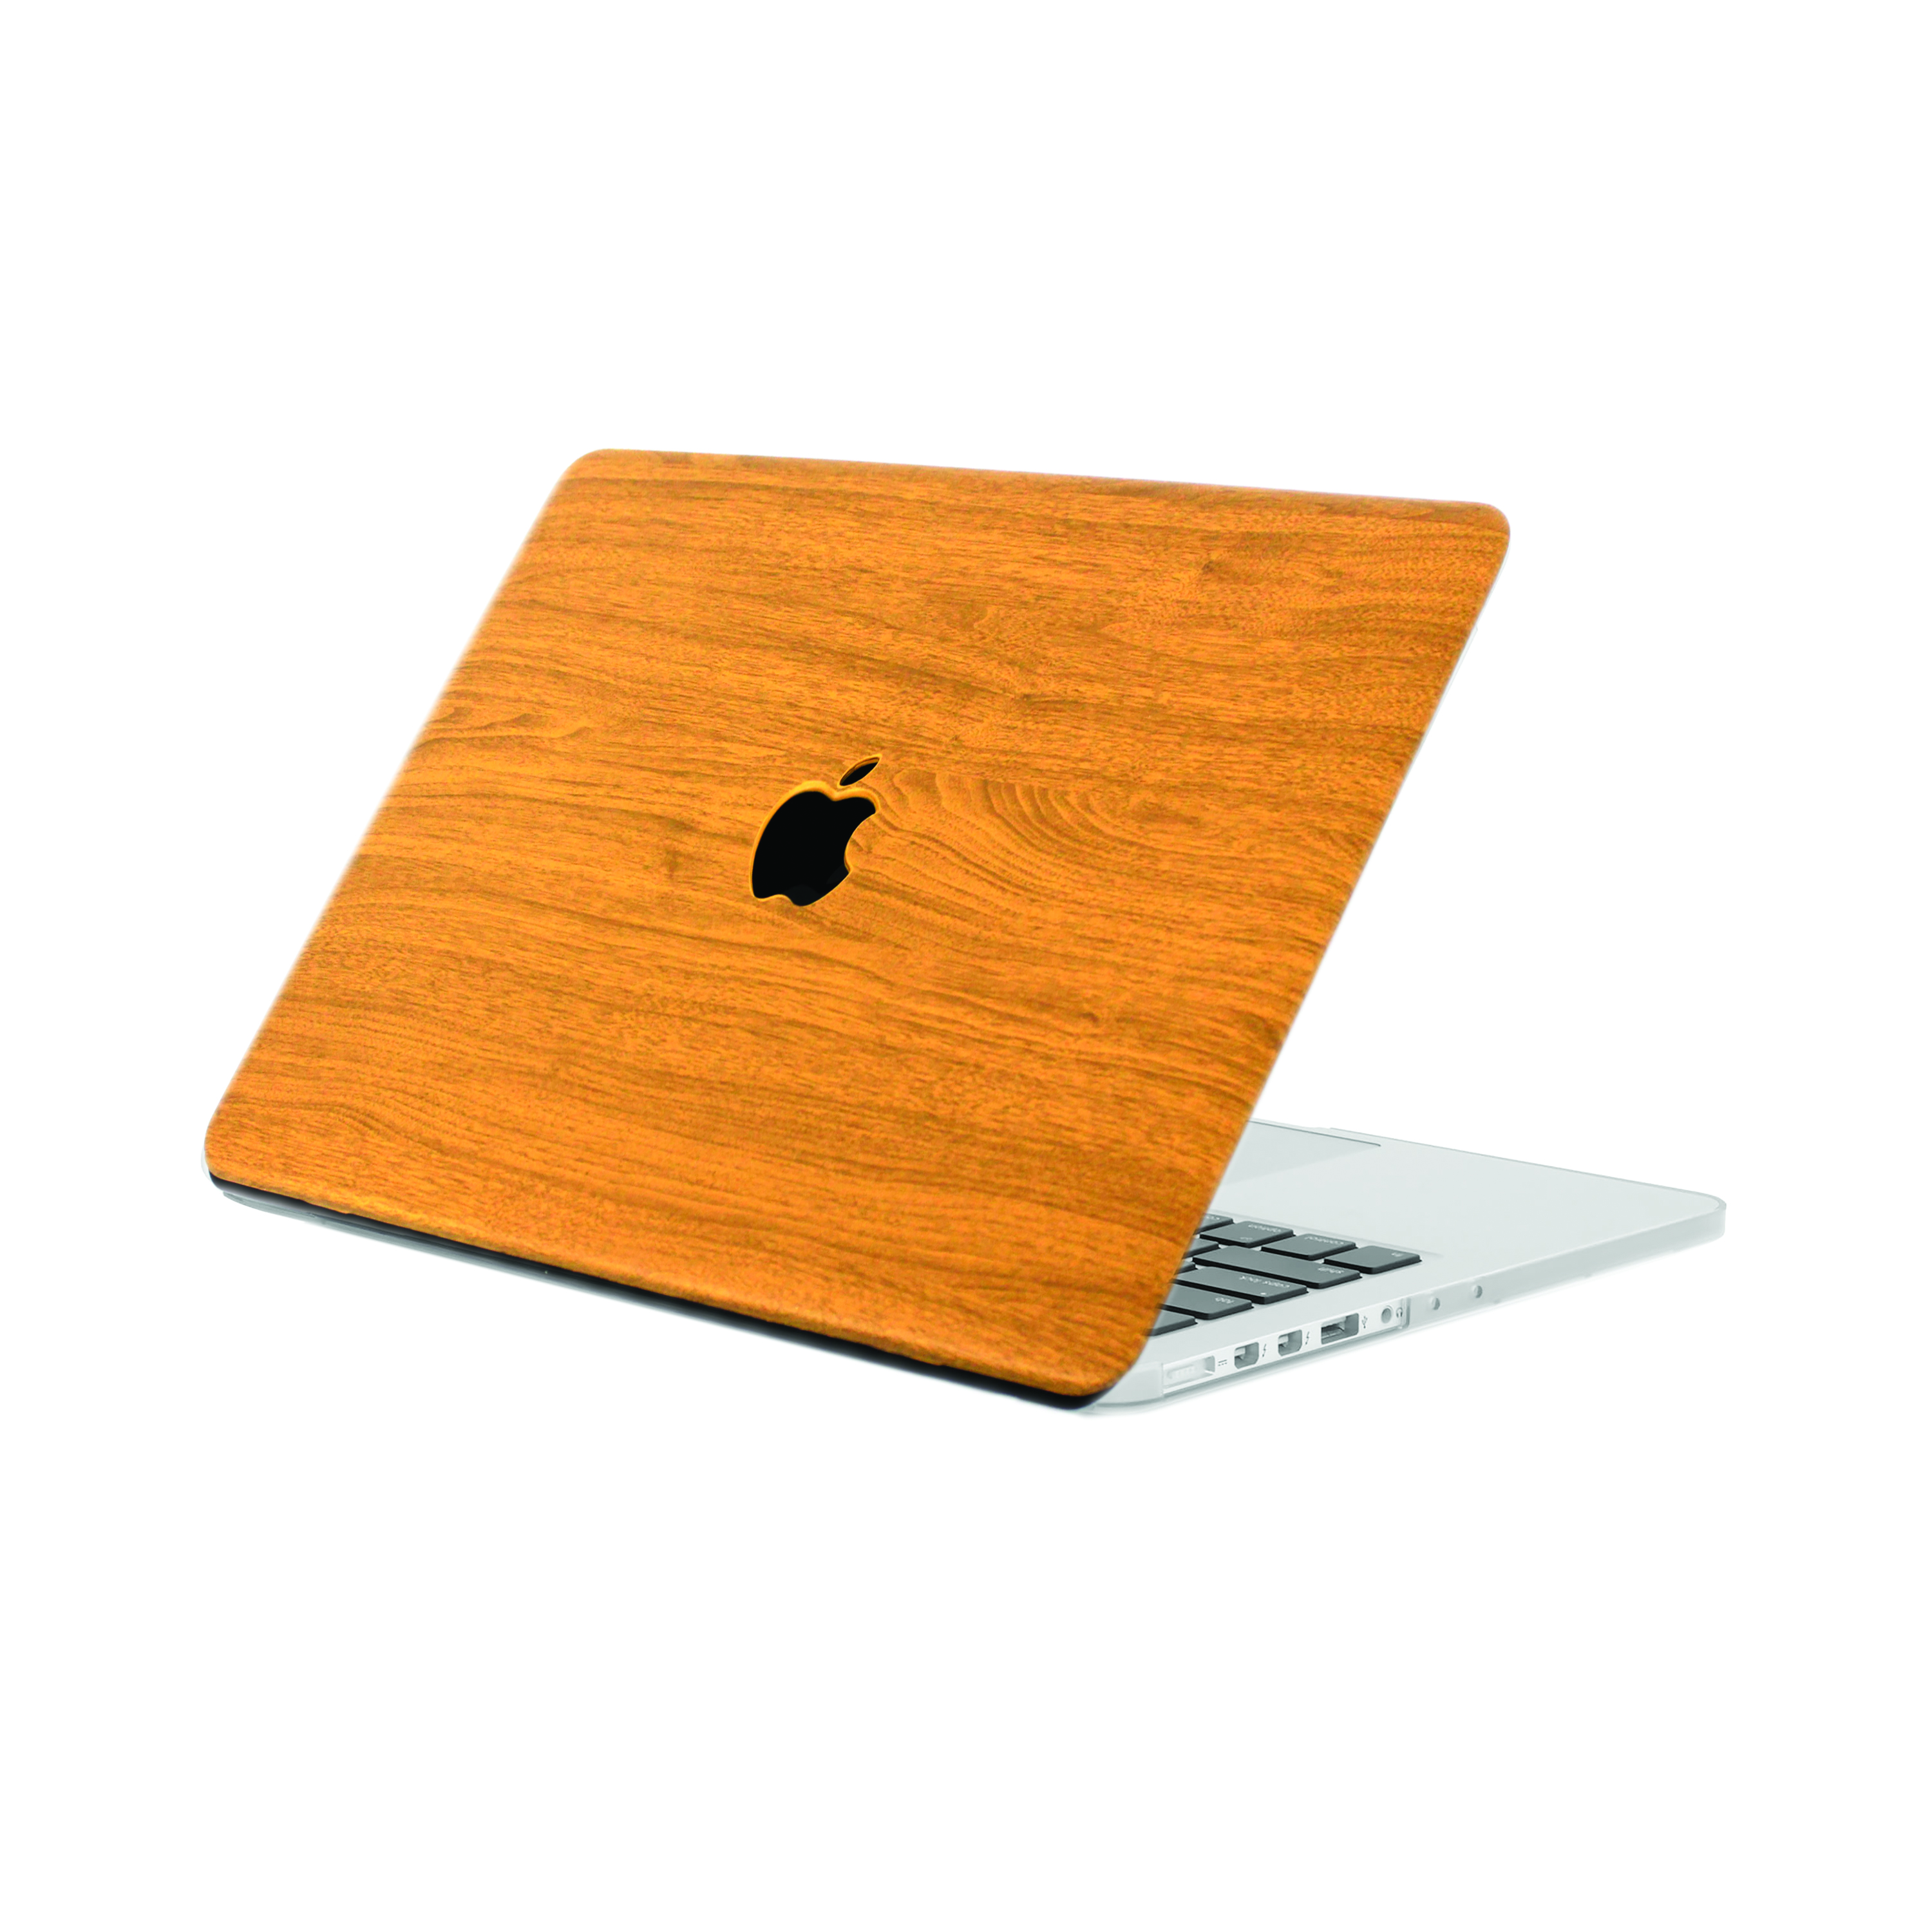 Like Wooden Hard Case for Macbook Pro 15 A1707 A1909 Love To Travel Mountains Laptop Case for Apple Mac Pro 15 inch Fits 2018 Latest Release Durable shell Cover RD2125 